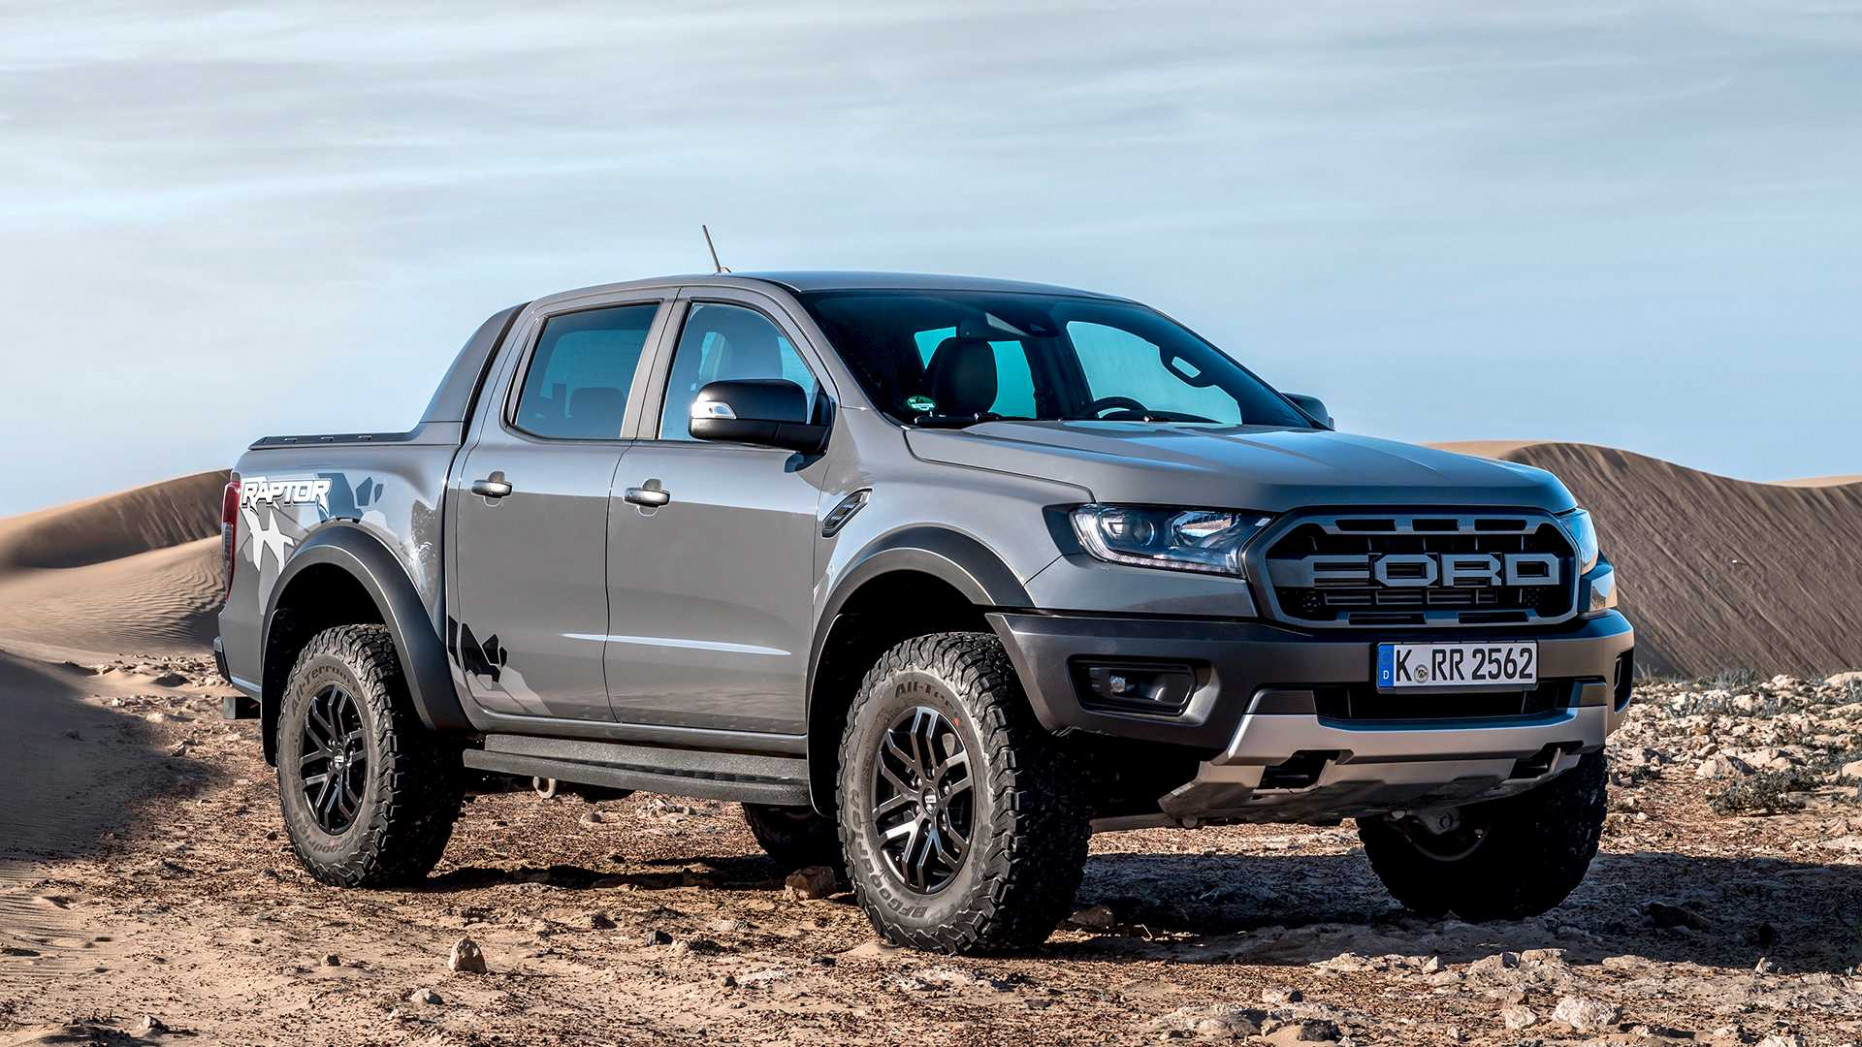 Ford Ranger Raptor Coming To U.S. On July 5 . .